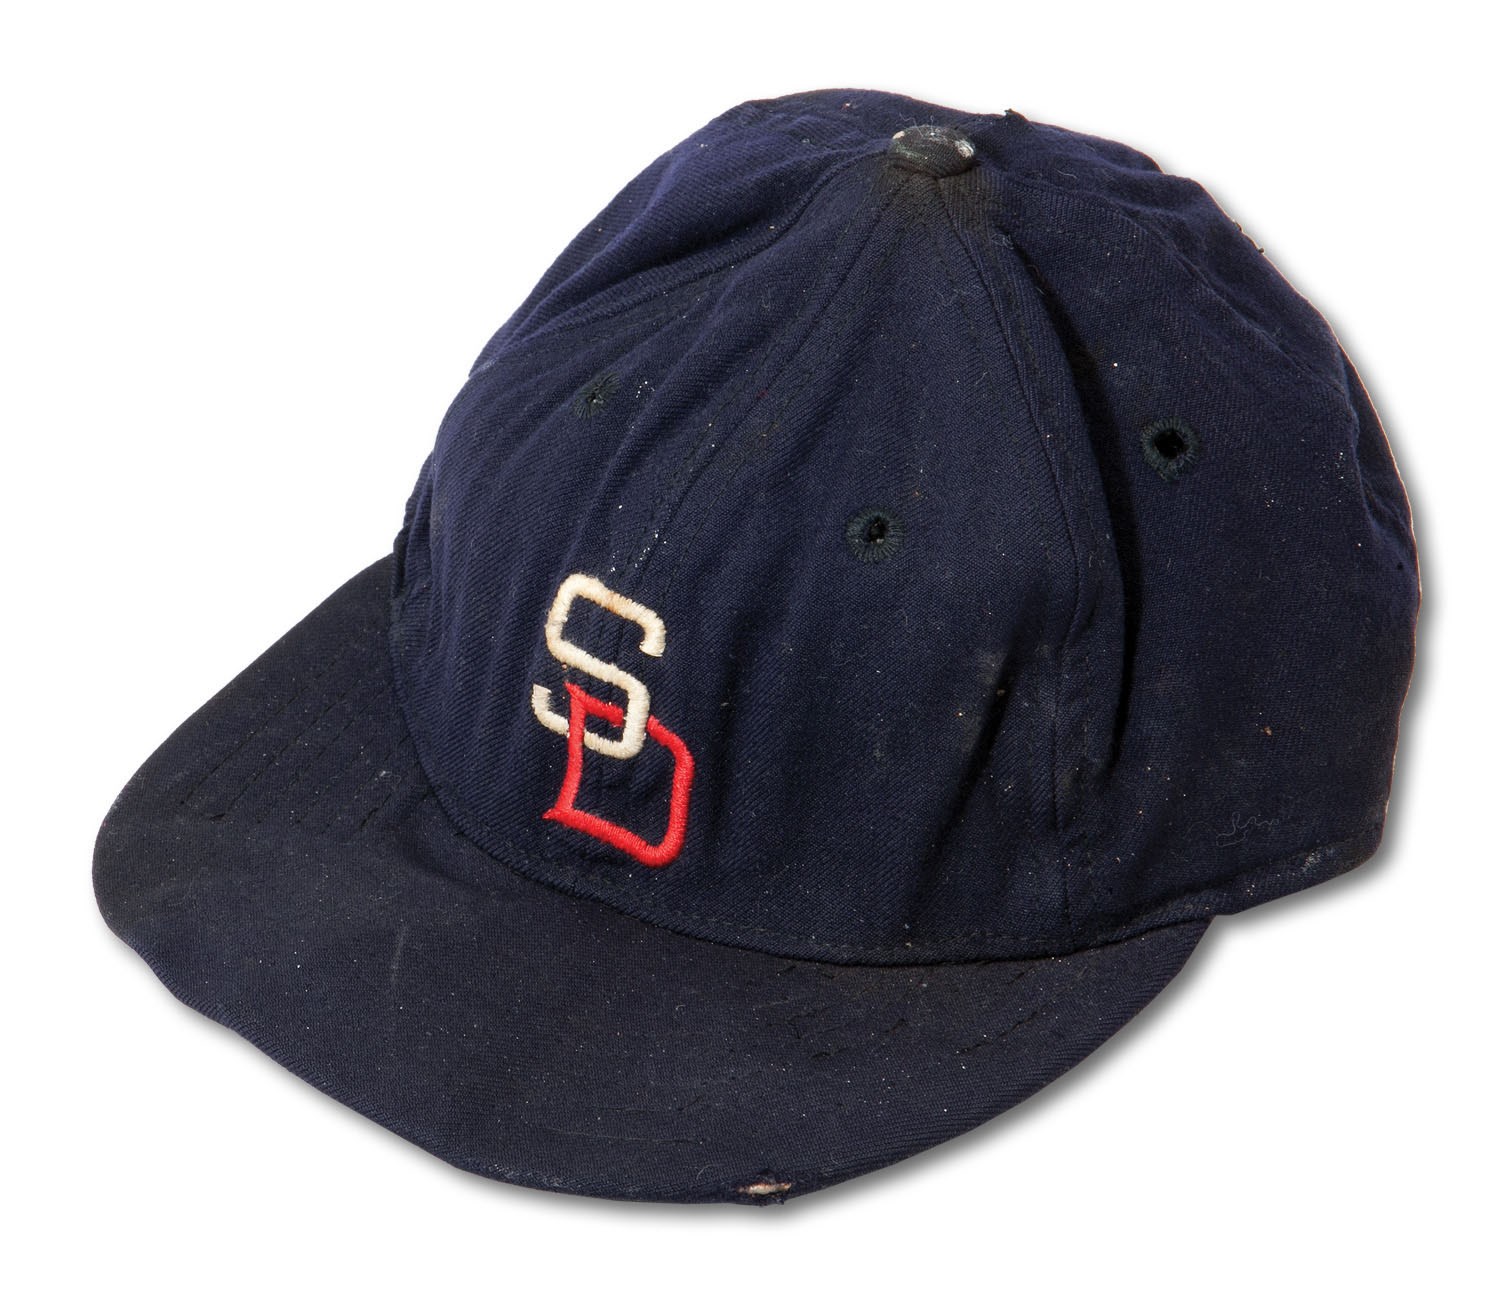 San Diego Padres on X: The Padres' Pacific Coast League game-worn